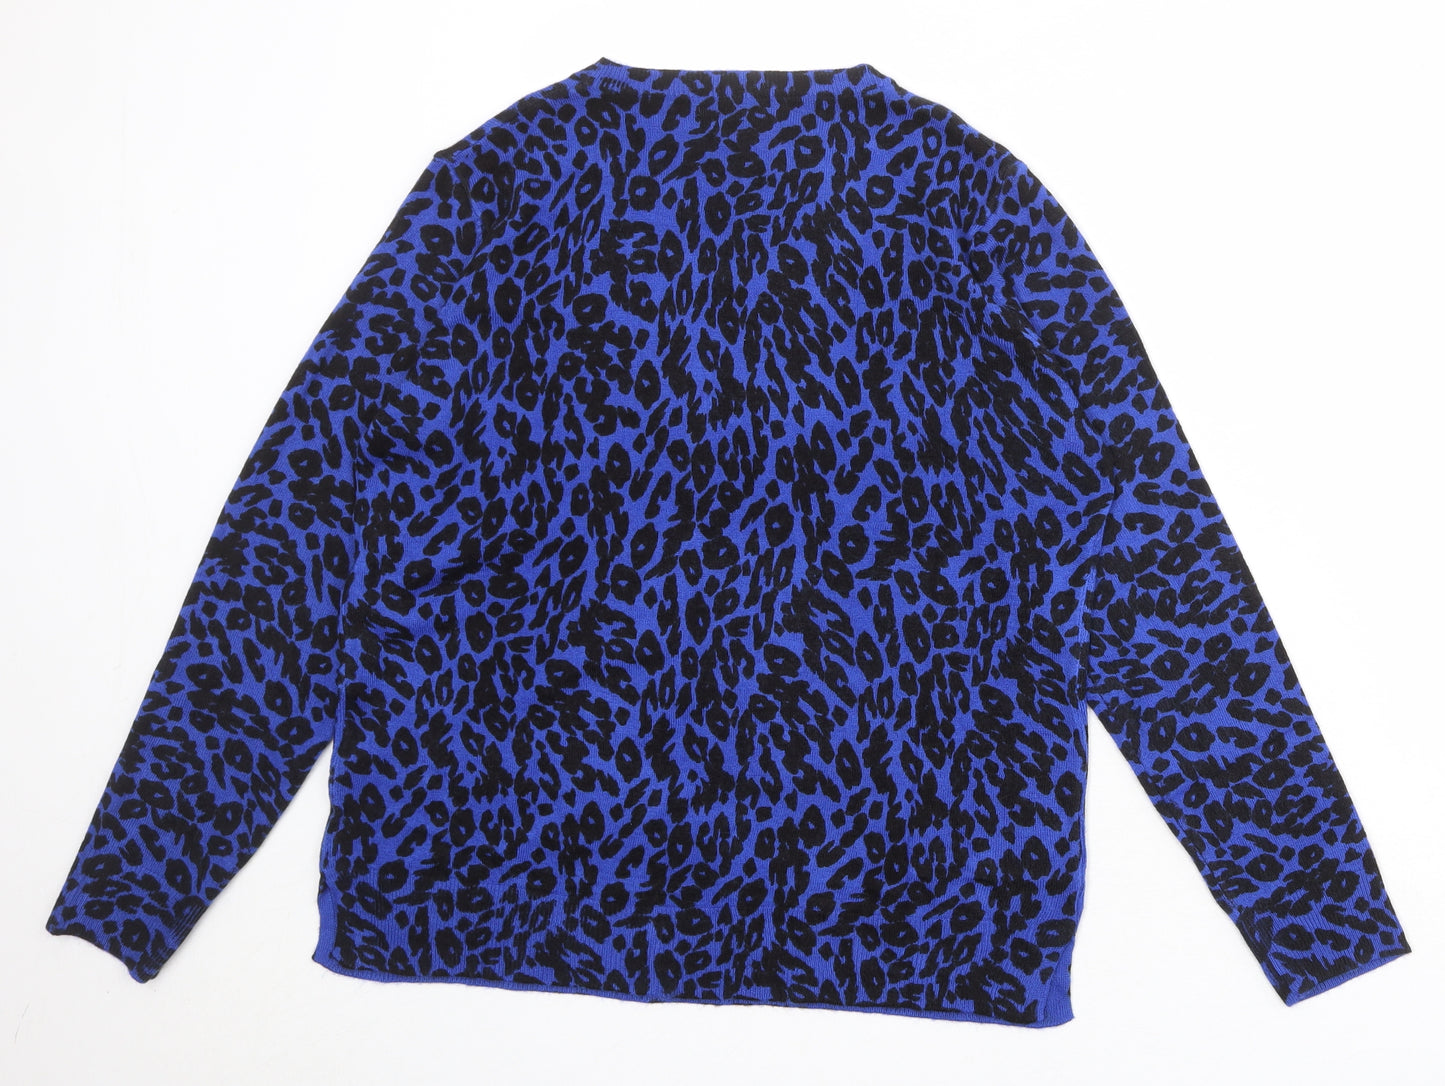 Marks and Spencer Womens Blue Round Neck Animal Print Acrylic Pullover Jumper Size 14 - Leopard Pattern